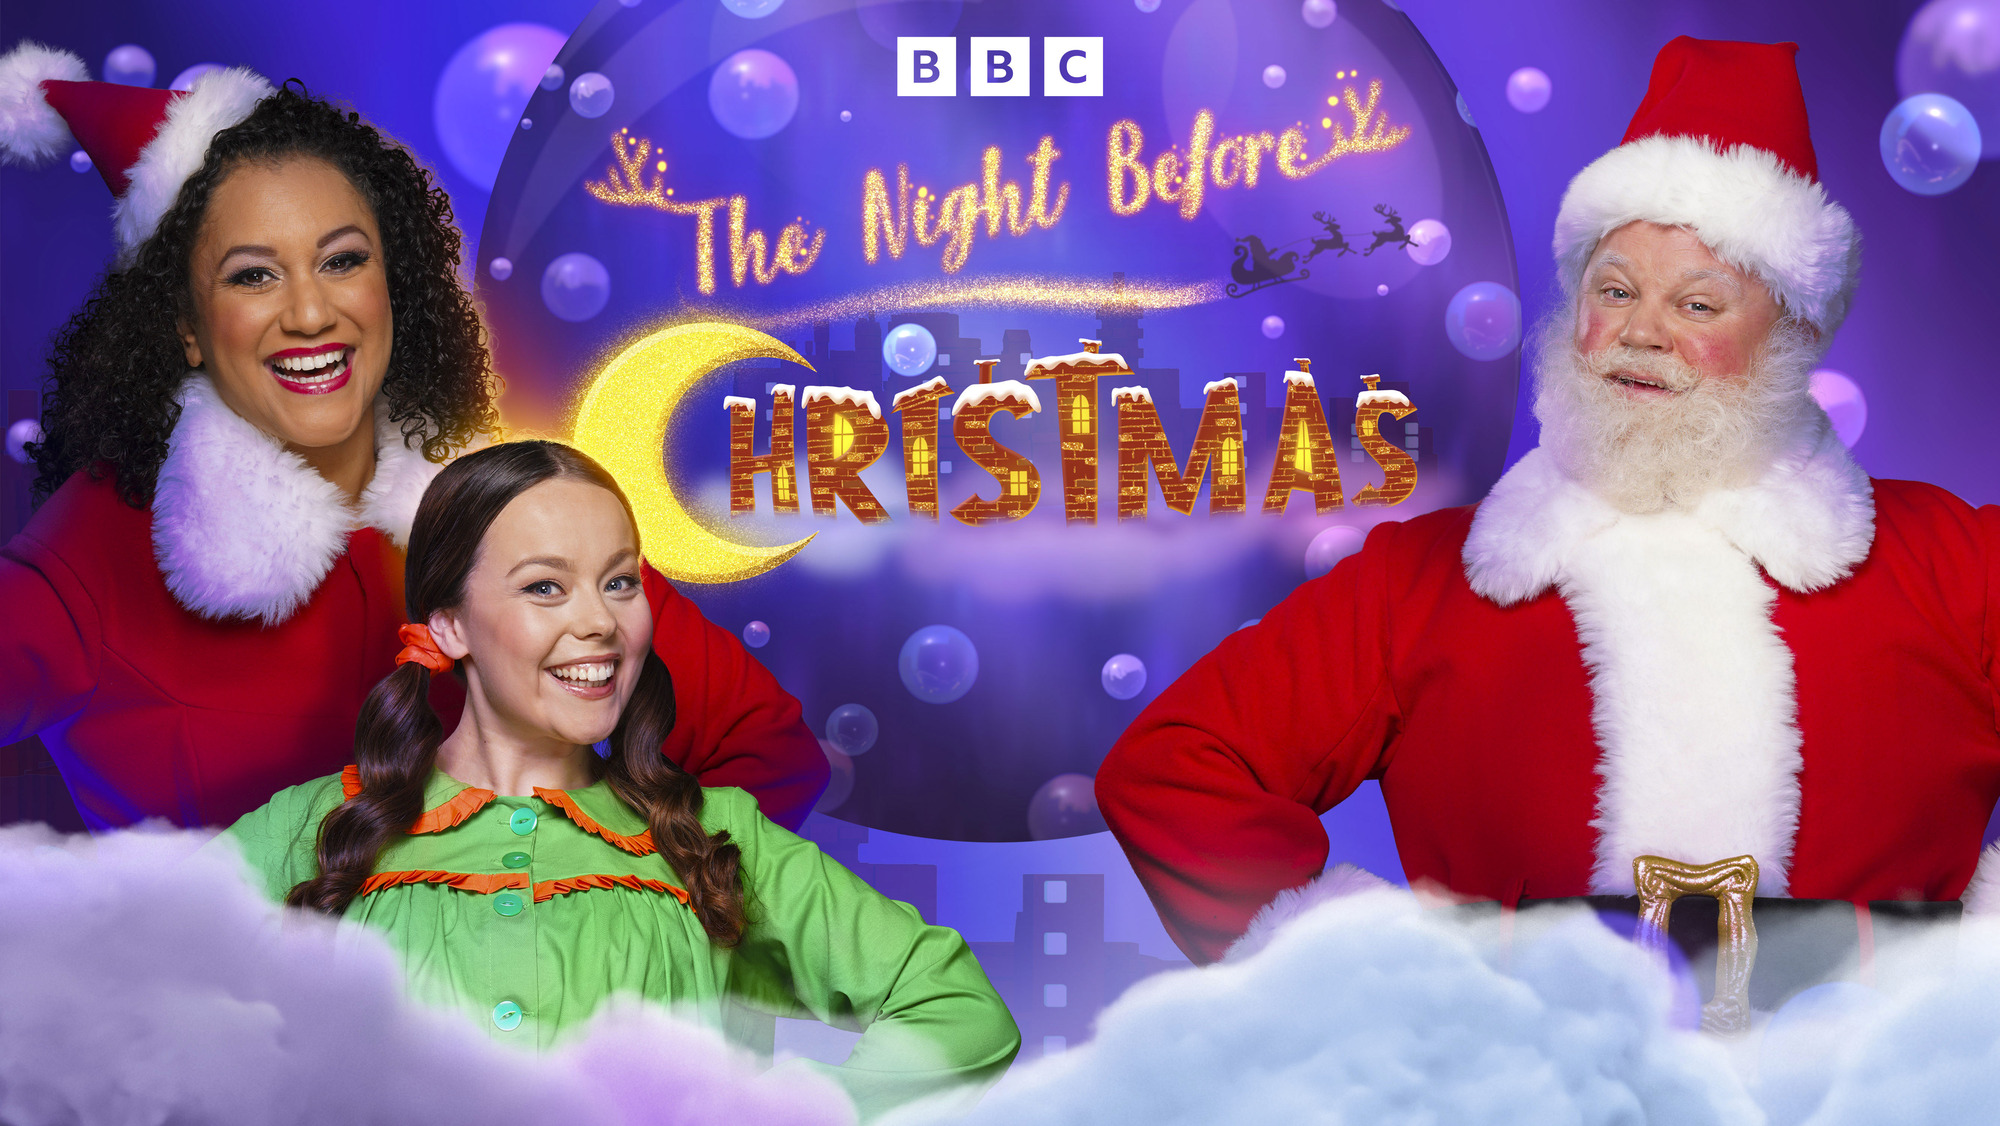 'The Night Before Christmas' CBeebies air date, cast, plot What to Watch